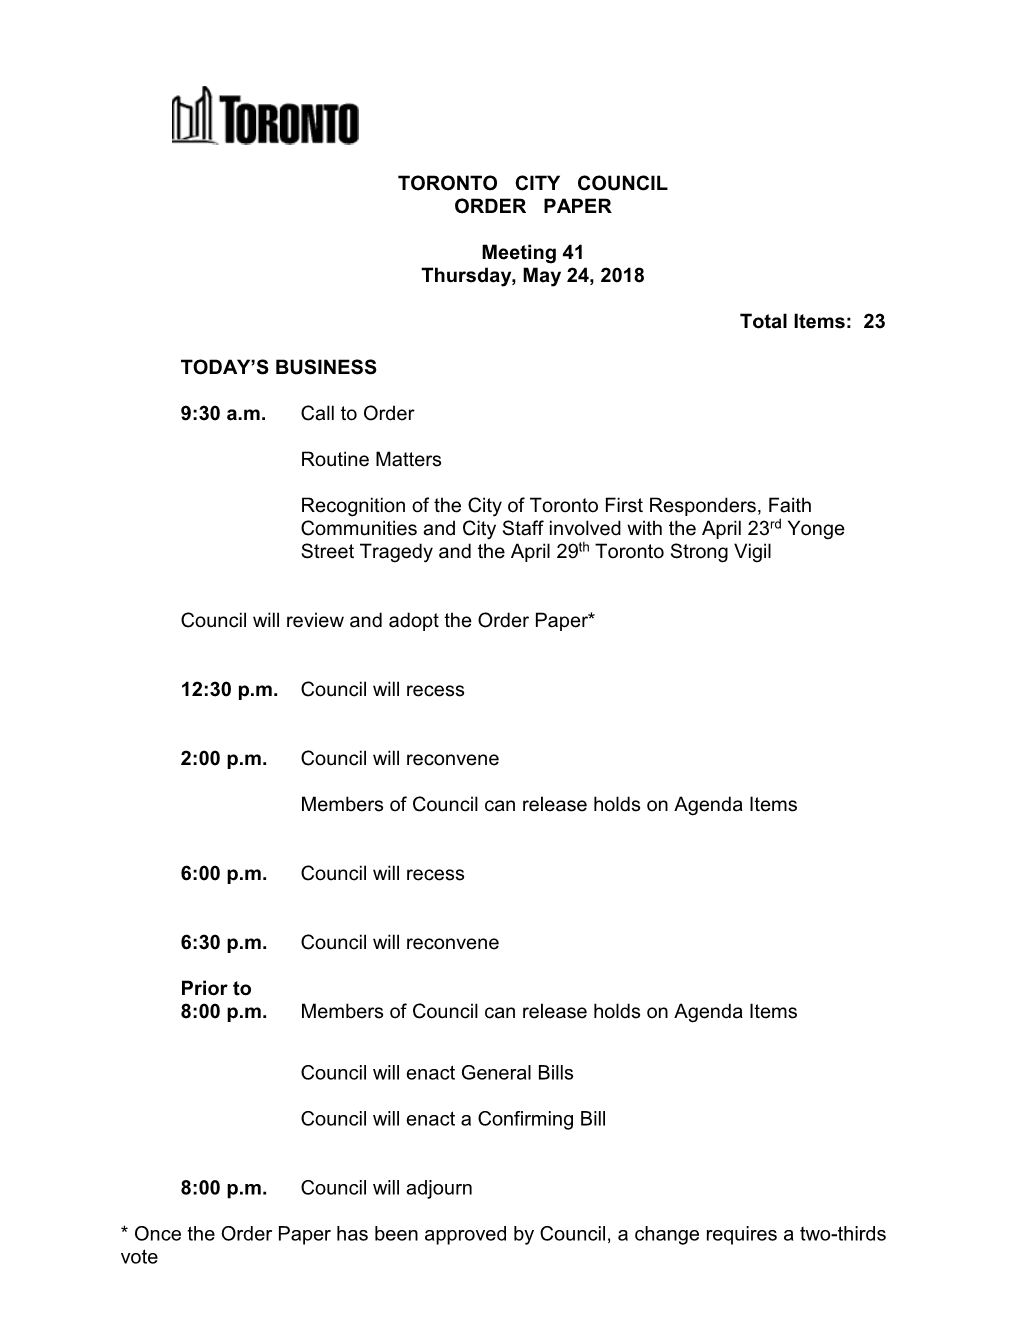 TORONTO CITY COUNCIL ORDER PAPER Meeting 41 Thursday, May